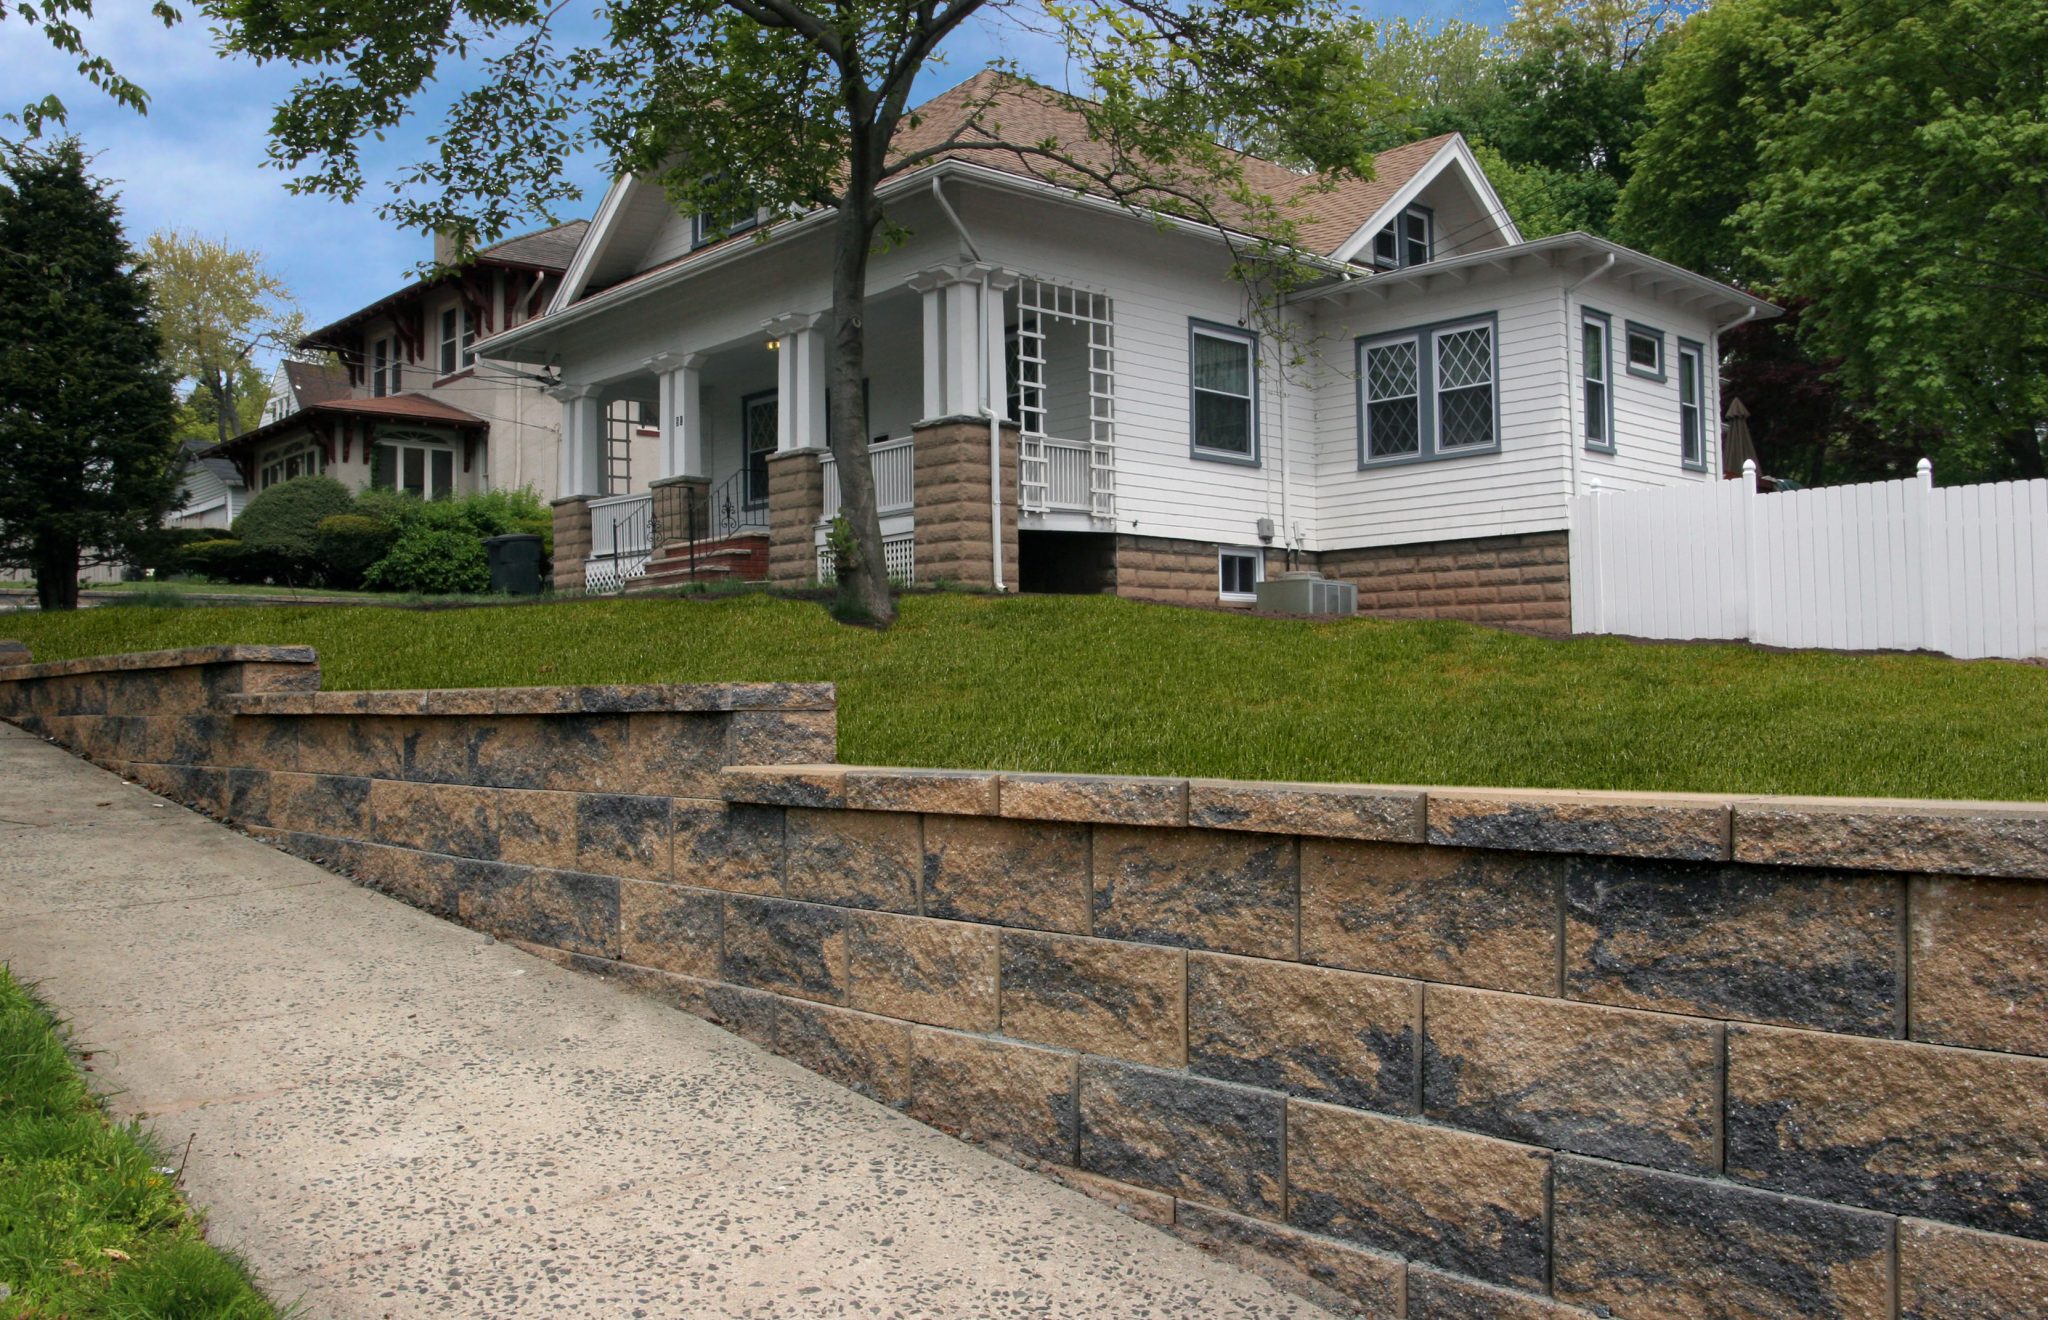 7 Questions to Ask Before Building DIY Retaining Walls